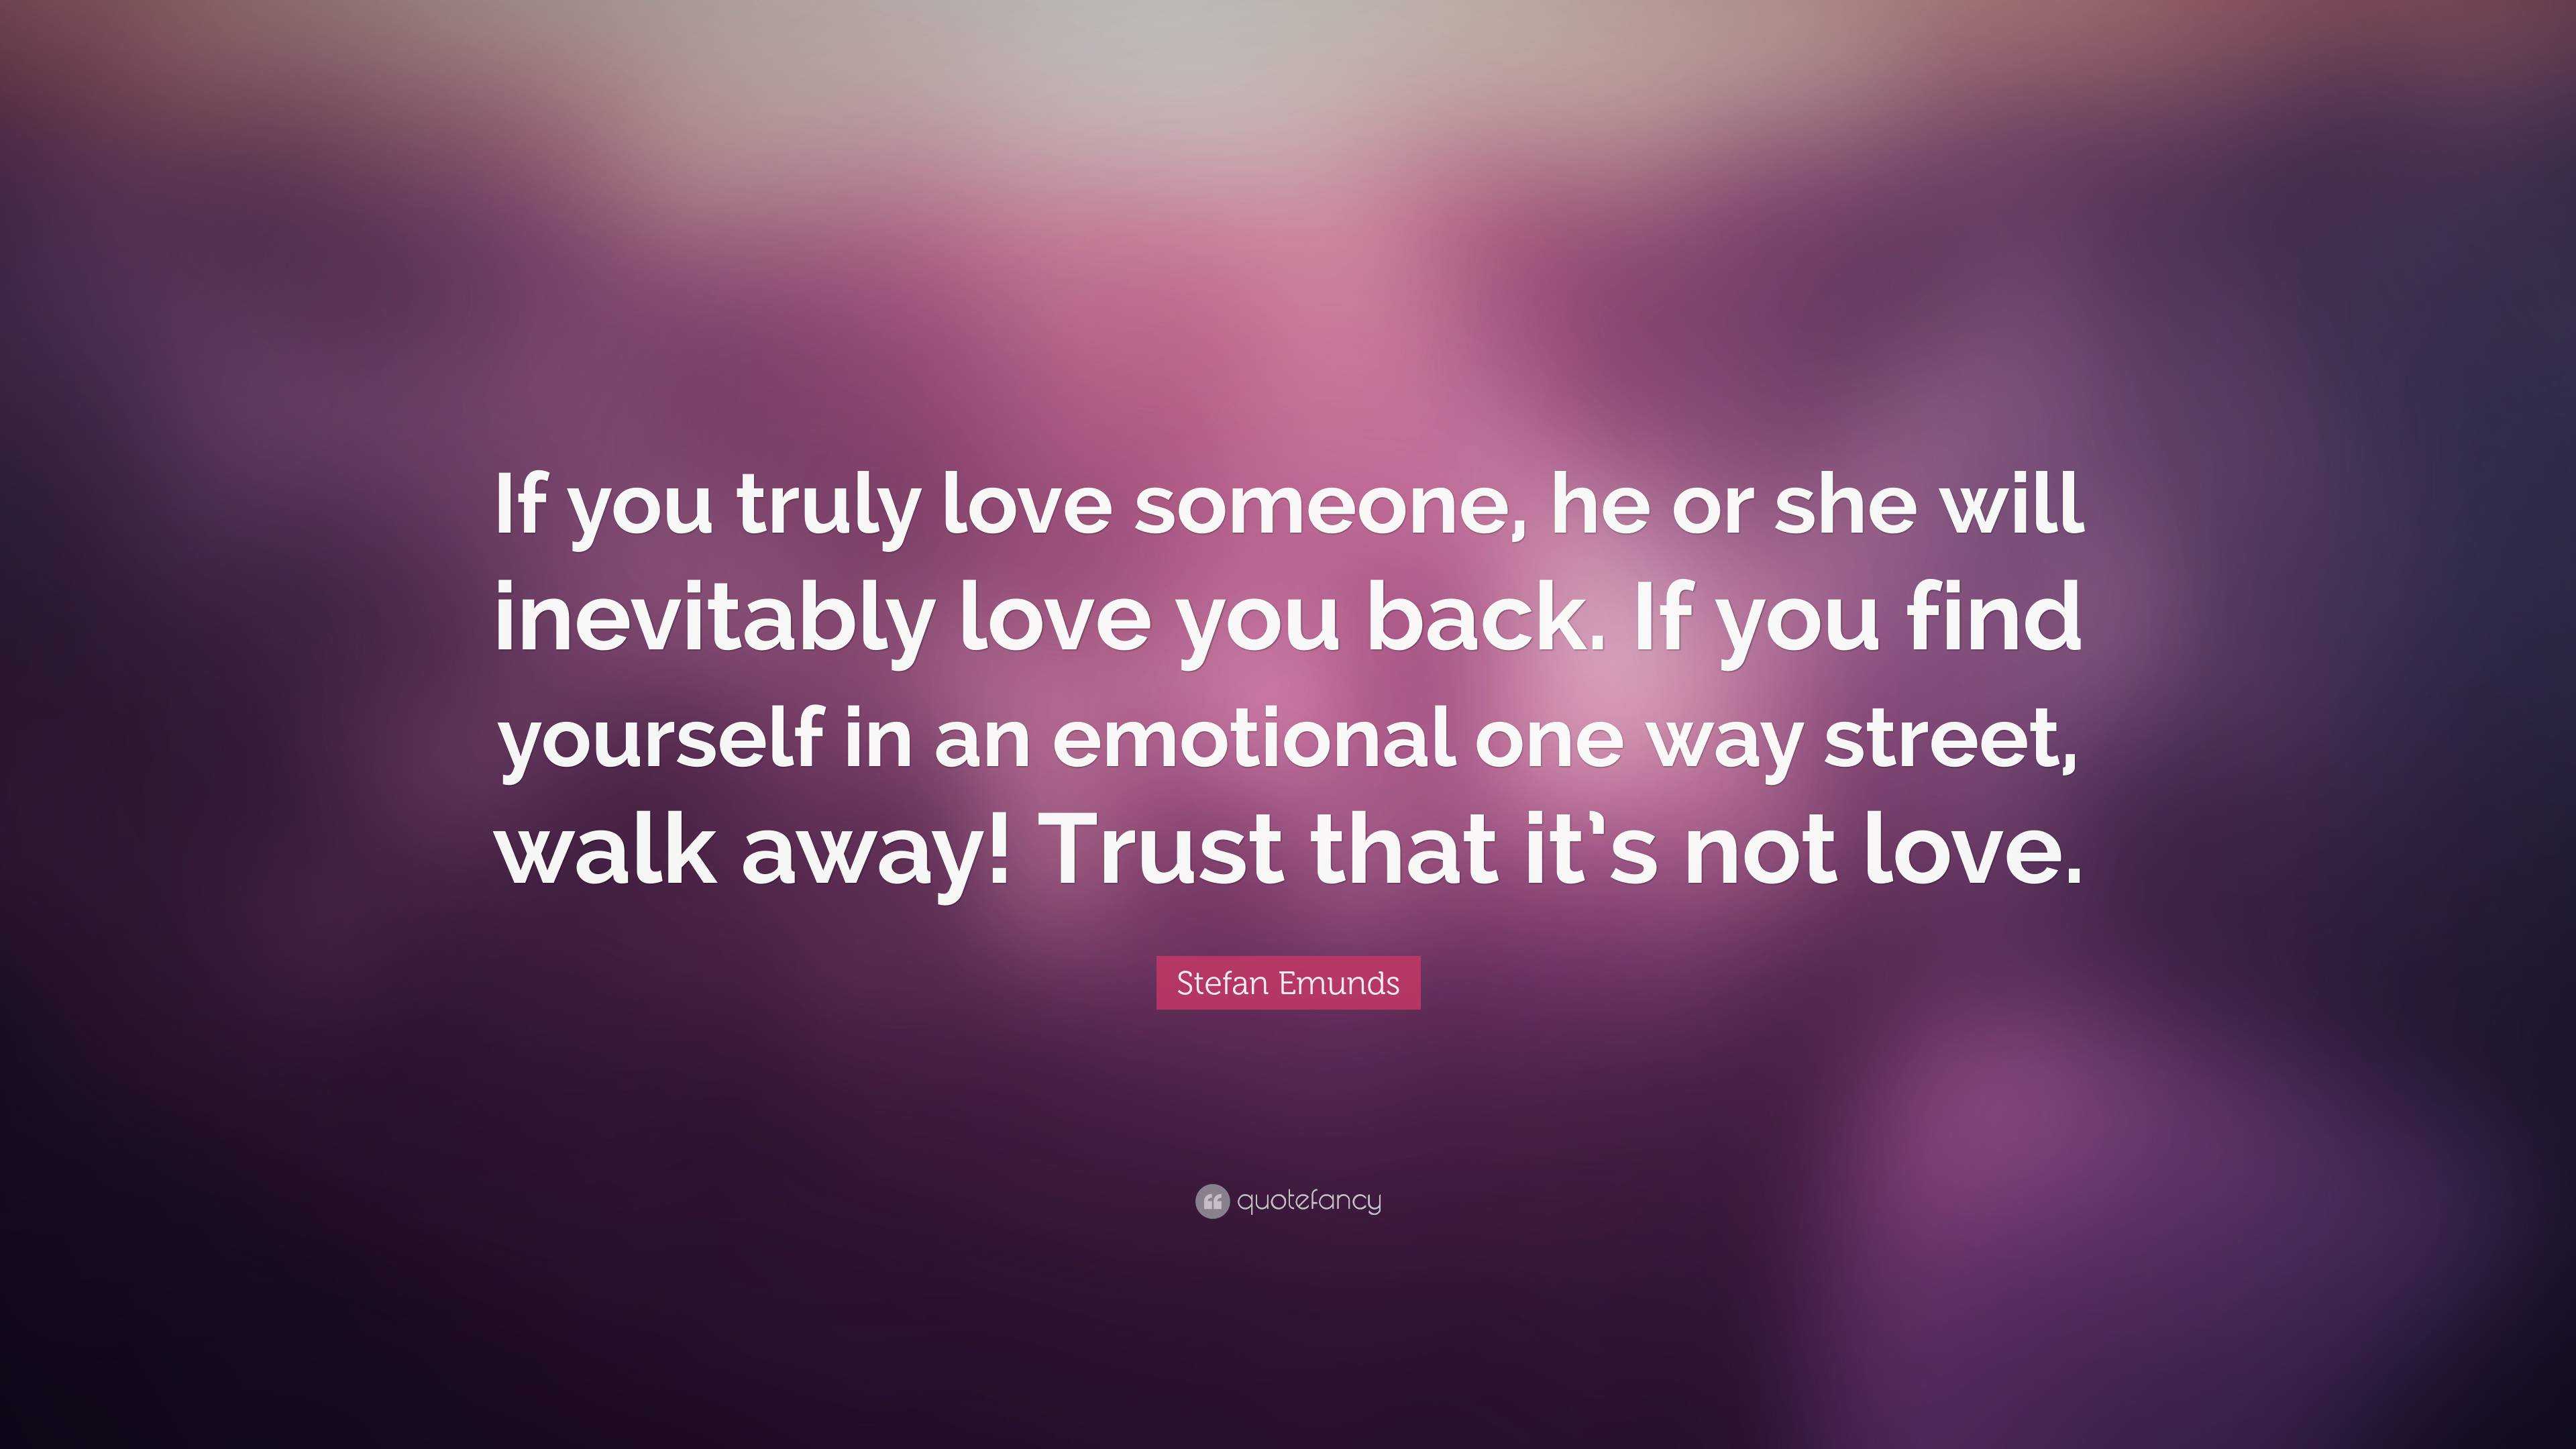 Stefan Emunds Quote If You Truly Love Someone He Or She Will Inevitably Love You Back If You Find Yourself In An Emotional One Way Street